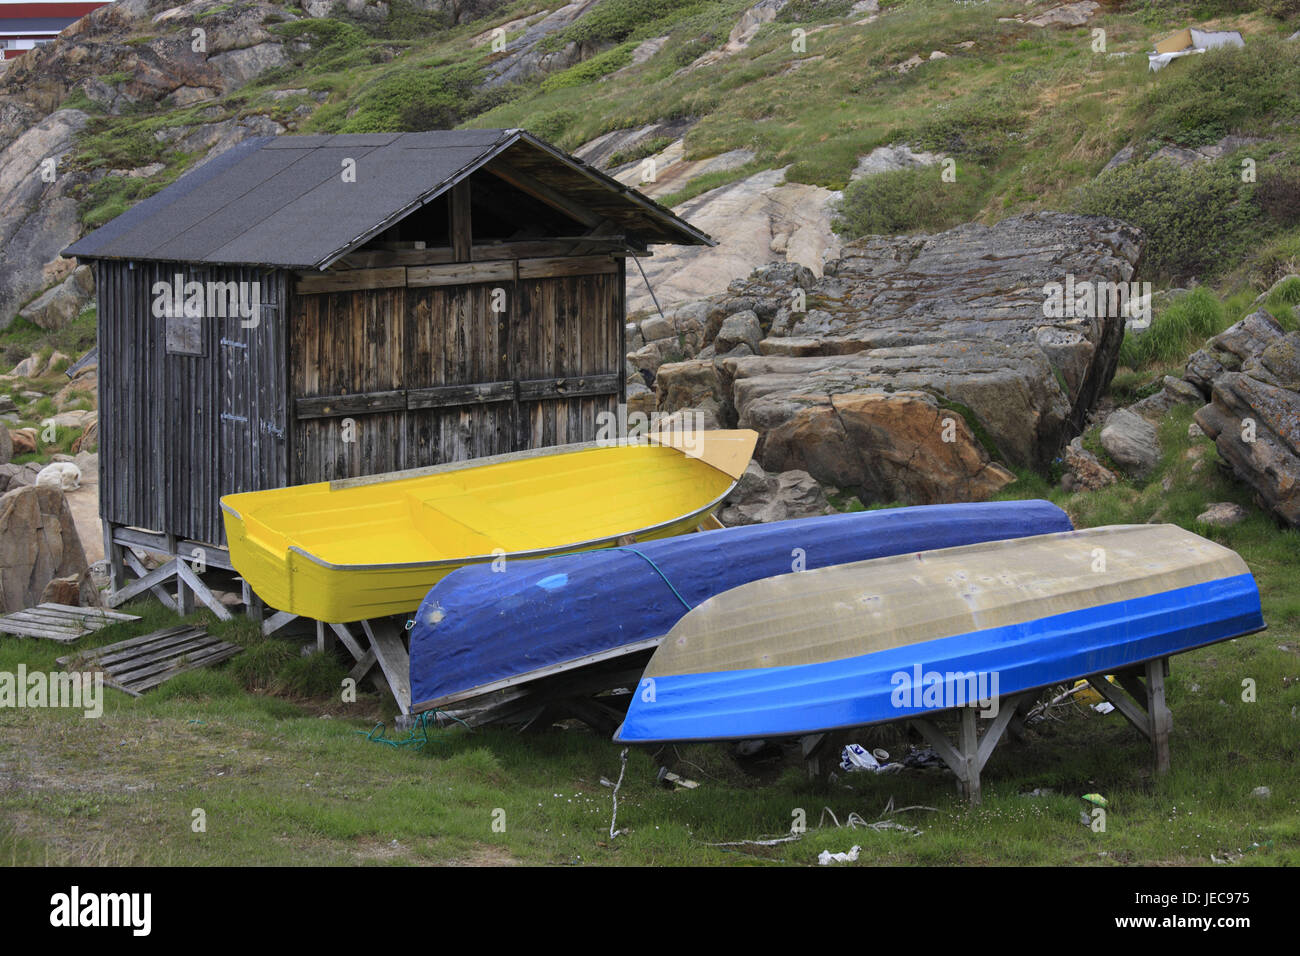 Greenland, Sisimiut, wooden hut, boats, Western Greenland, town, destination, steelworks, timber-frame construction way, oar boots, fishing boats, blue, yellow, outside, deserted, meadow, rock, coast, Stock Photo